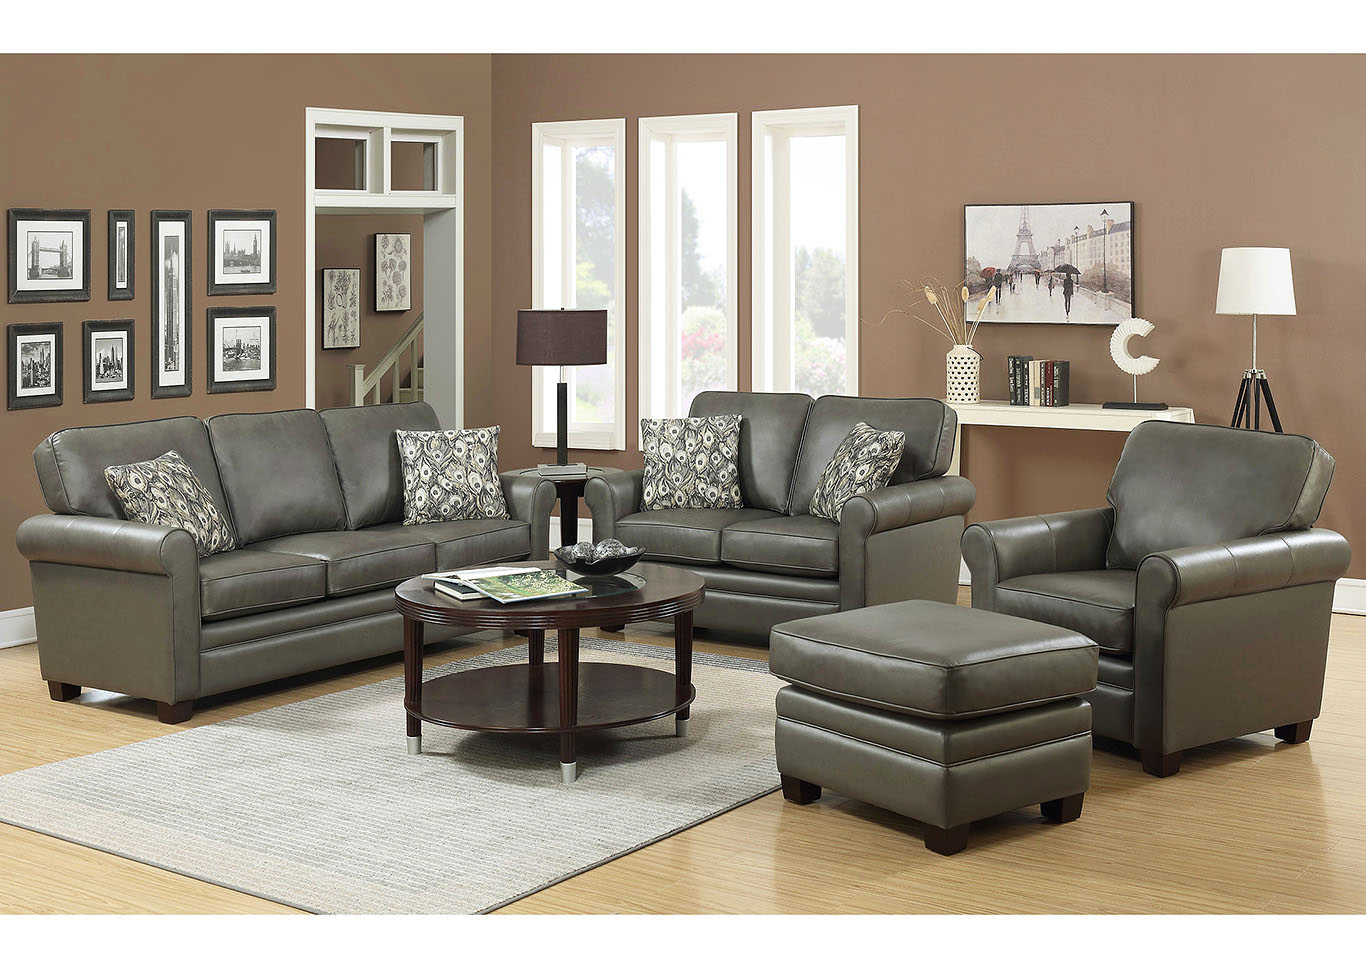 April Gray Leather Match Stationary 4 Piece Set,Taba Home Furnishings